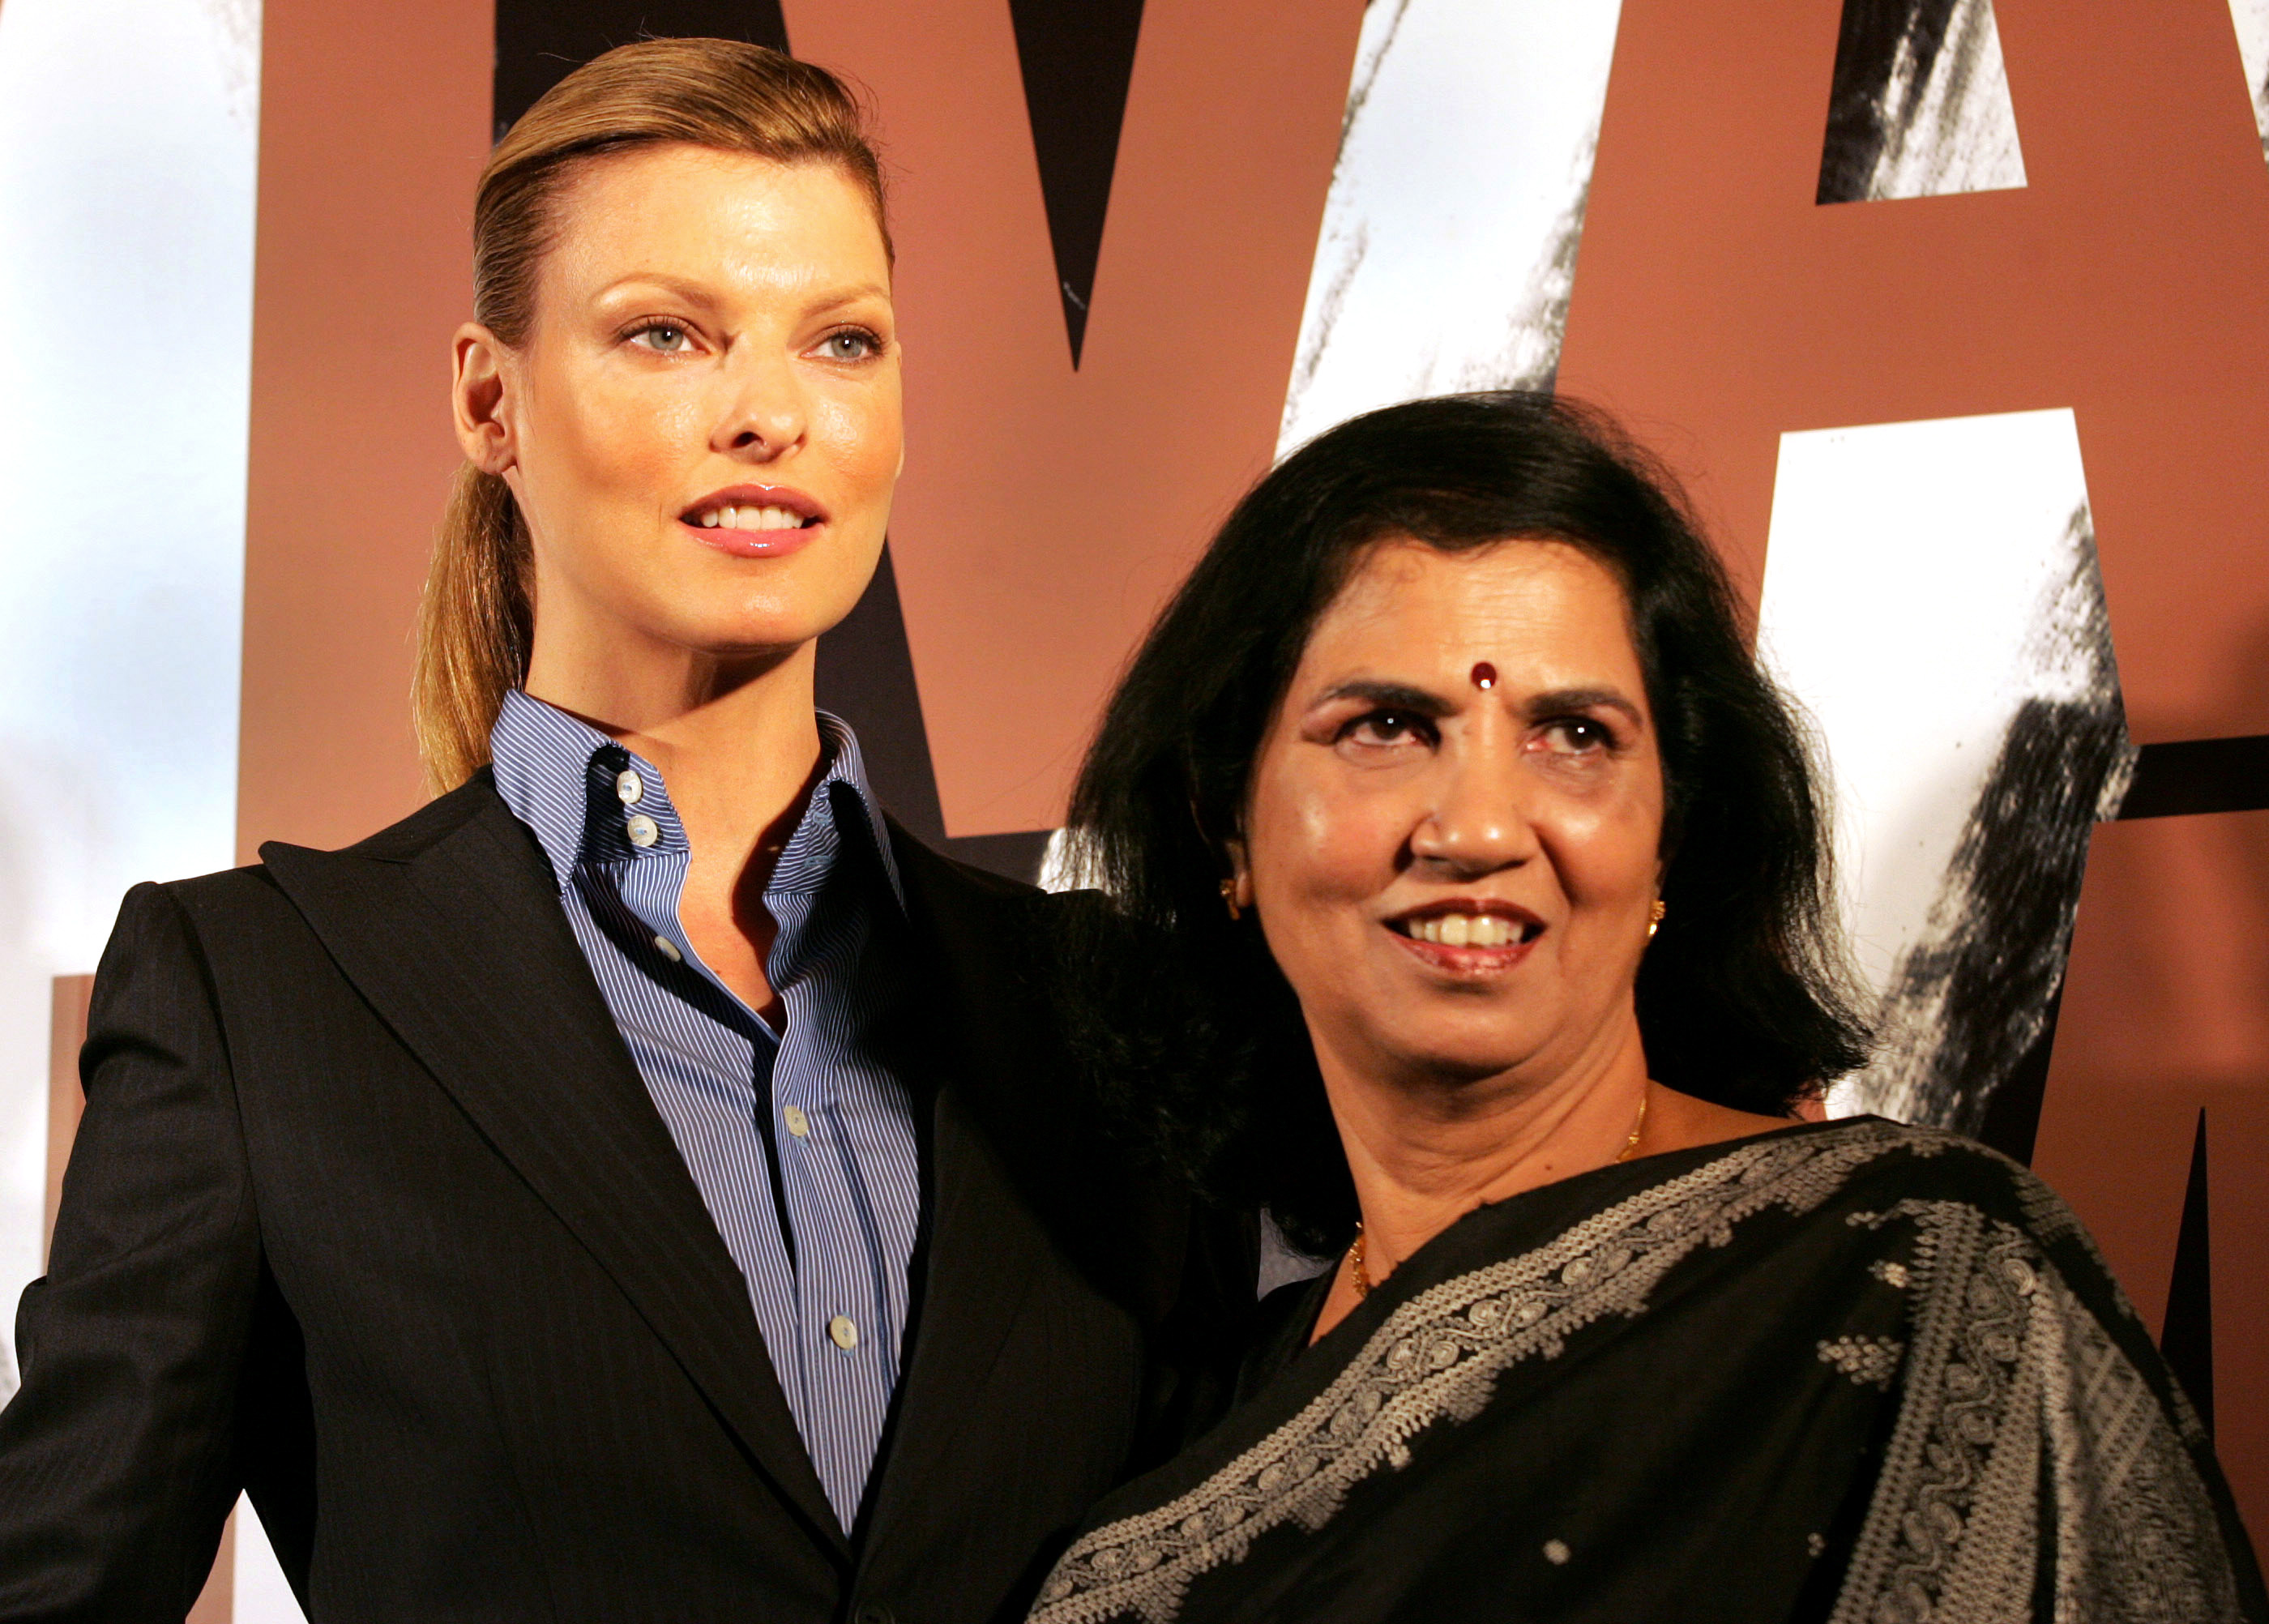 Canadian supermodel Linda Evangelista, left, and Director of Y.R. Gaitonde Center for AIDS Research and Education Suniti Solomon at a charity function in Mumbai, India on Oct. 21, 2005 (Rajesh Nirgude—AP)